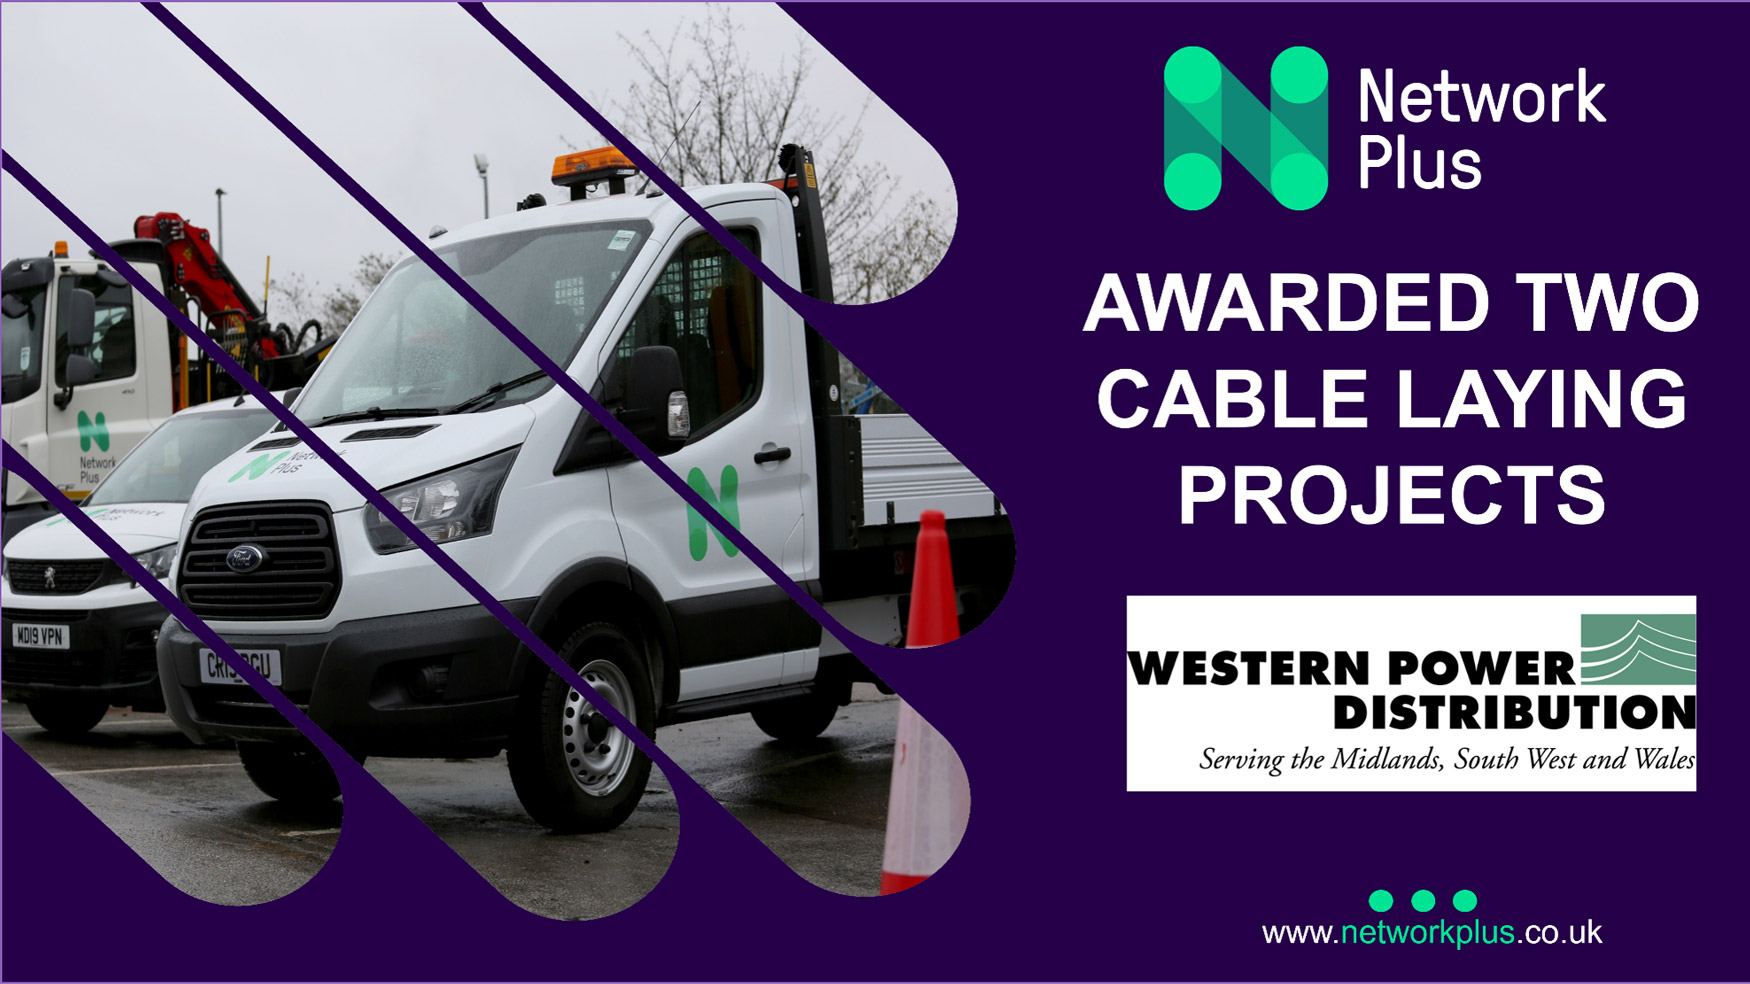 Continuing the successful delivery of cable laying projects on behalf of Western Power Distribution (WPD), Network Plus have recently won two significant new projects in Nottingham and Burton Upon Trent.